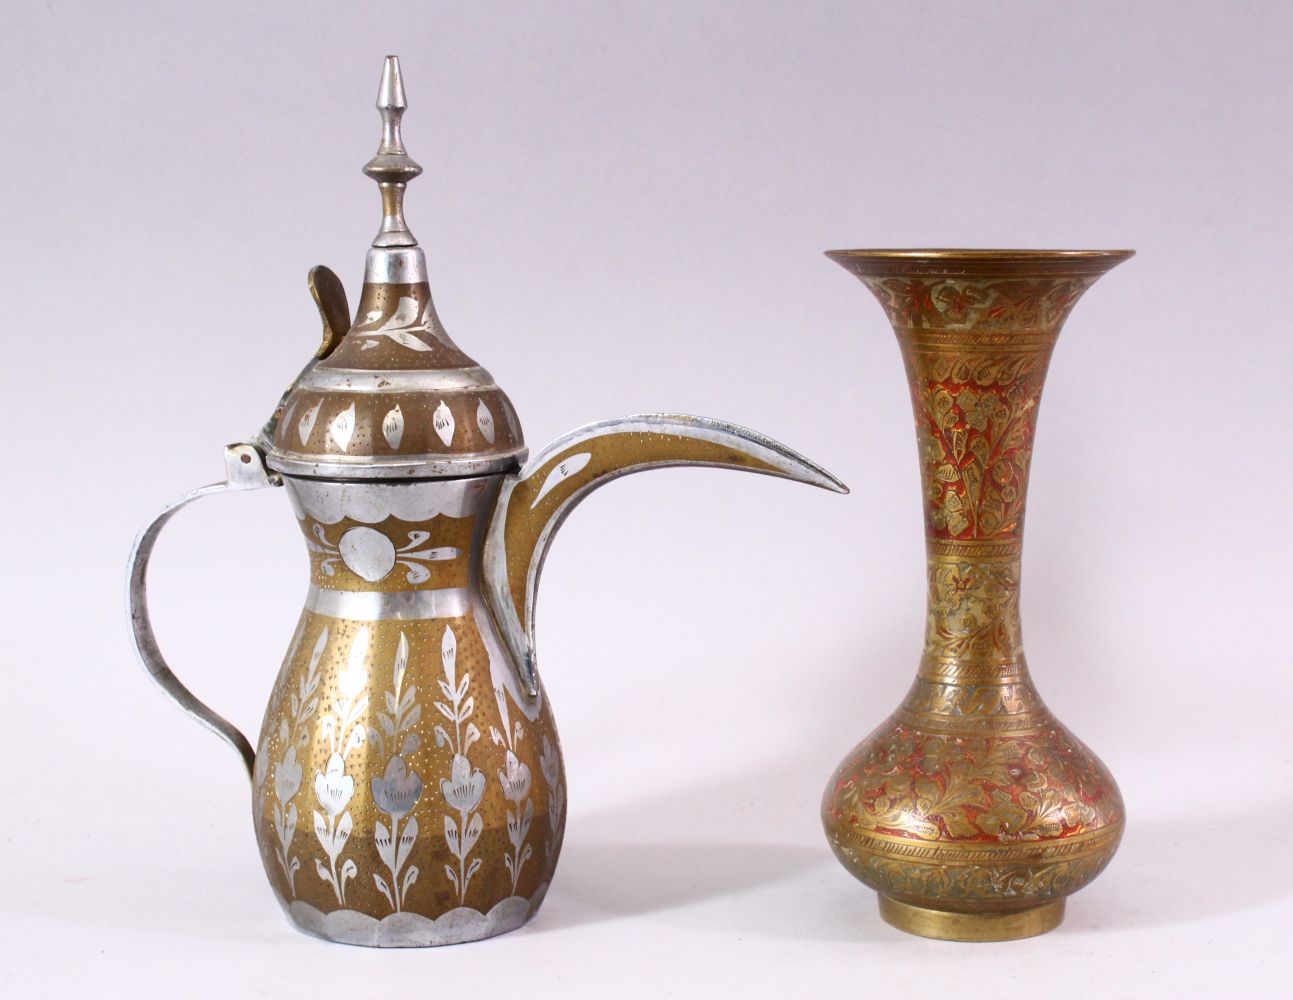 A PERSIAN ENAMEL DECORATED BRASS VASE AND EWER, vase 17cm high.